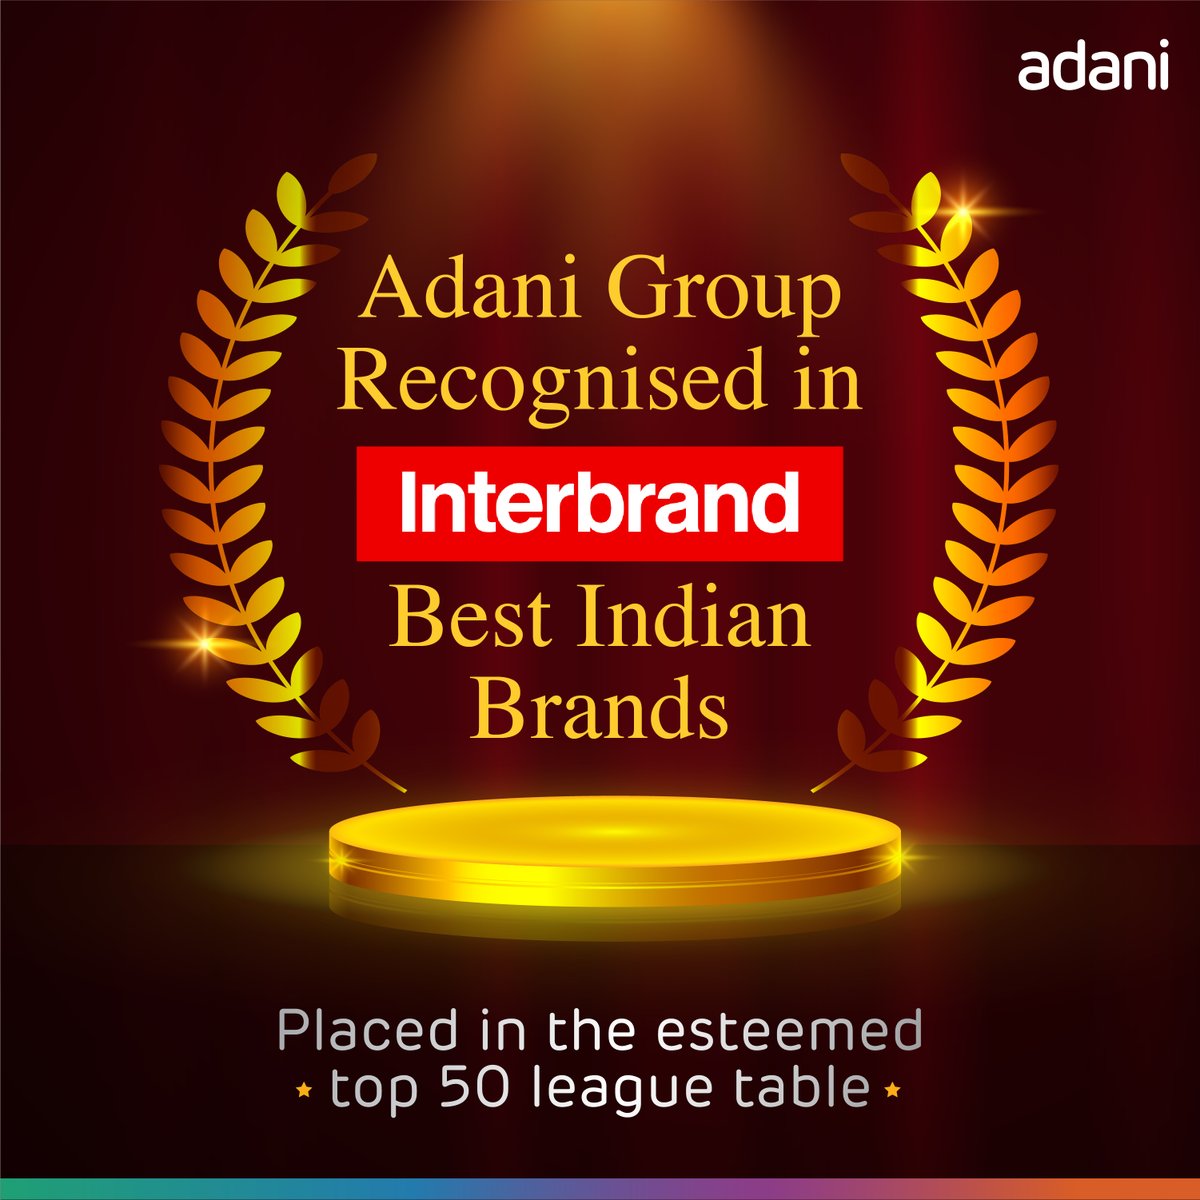 Celebrating a significant achievement! #AdaniGroup has been recognised as Interbrand's Best Brand, ranking #22 in the esteemed top 50 league table. We are proud to be among India's top brands, showcasing our commitment to #GrowthWithGoodness.
@Interbrand